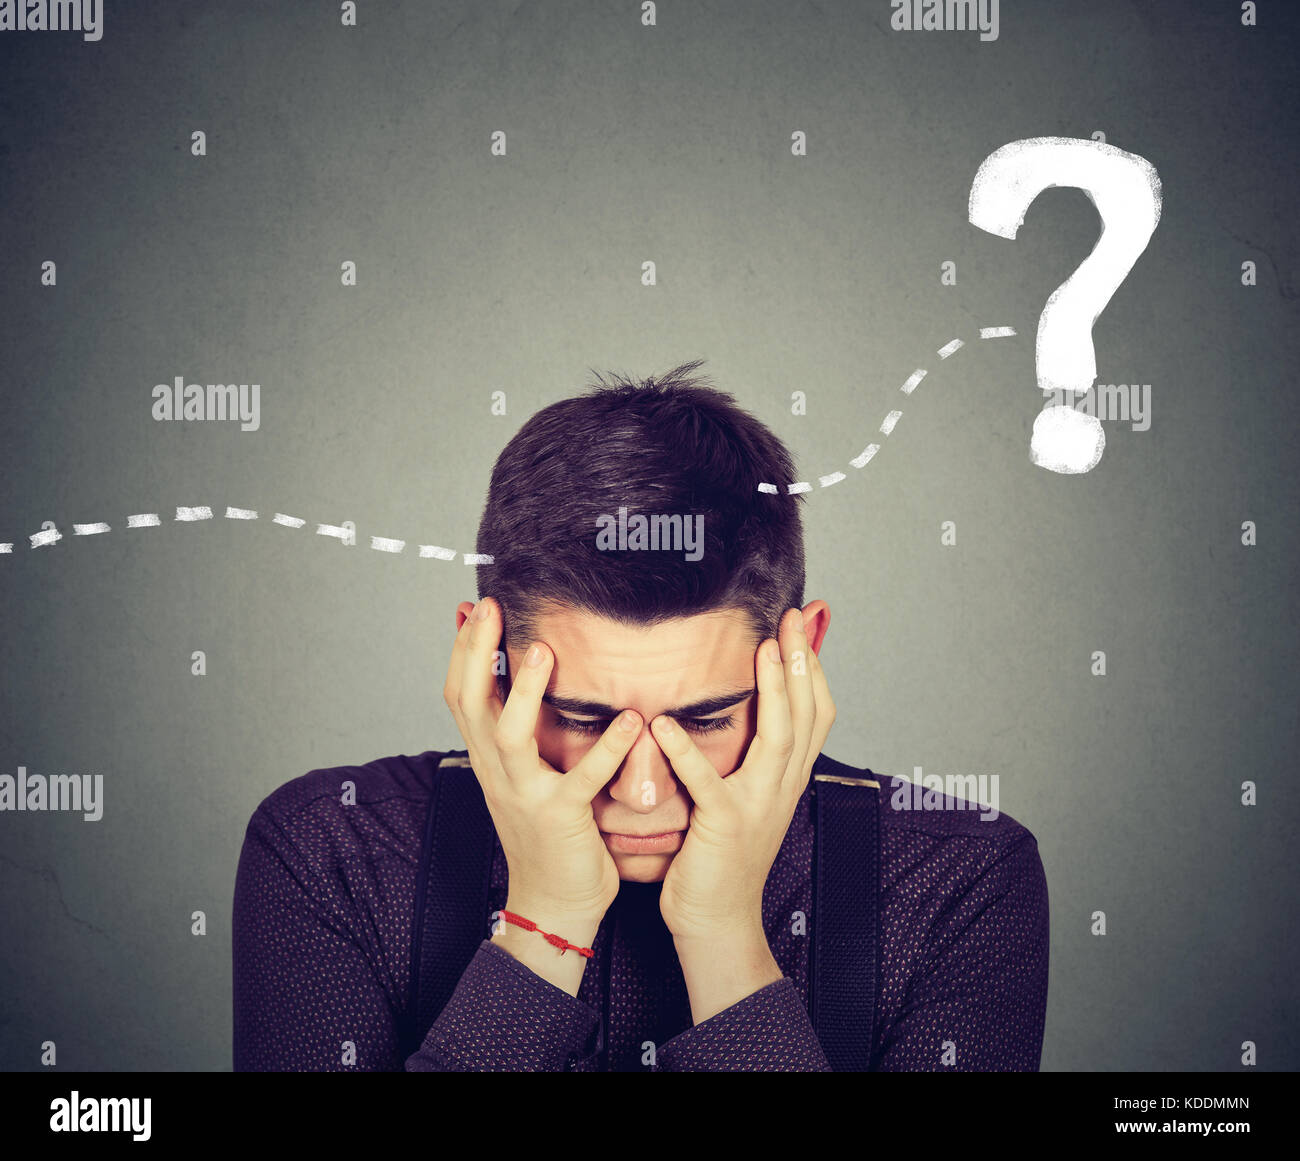 Desperate man thinking looking for a solution Stock Photo